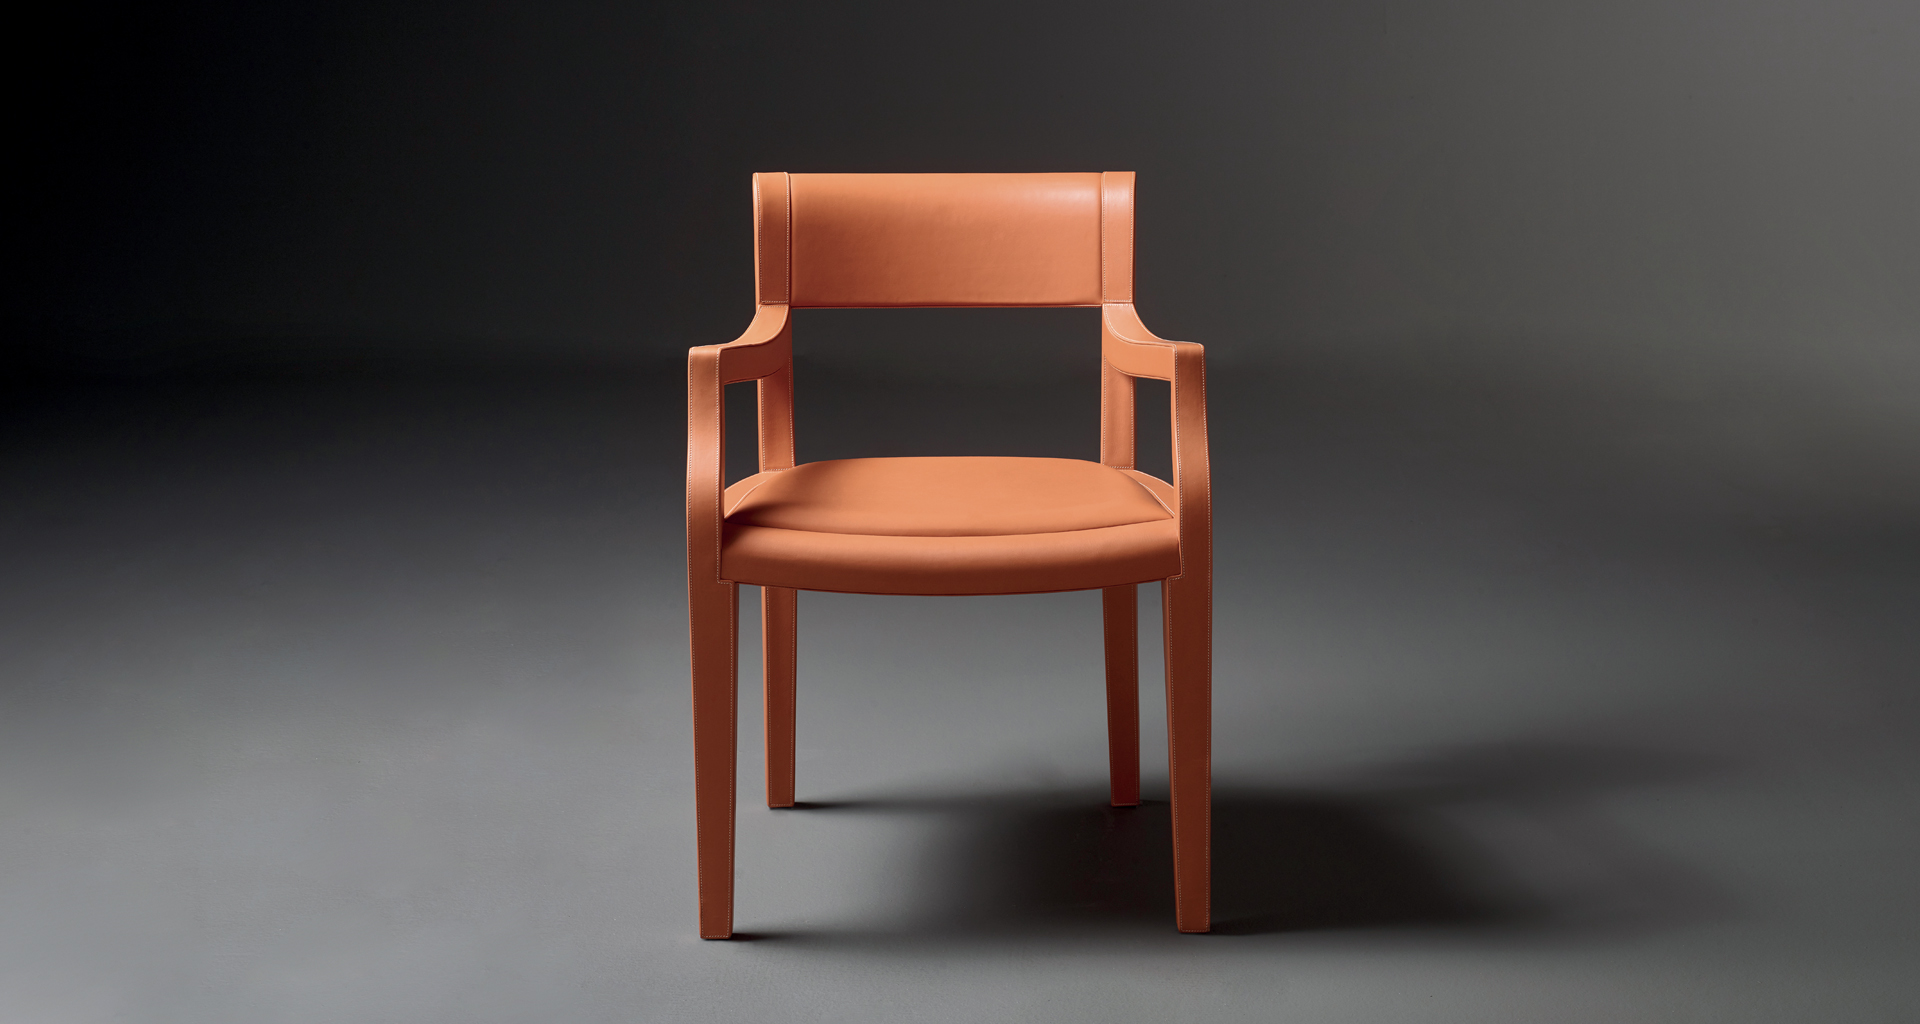 Eloise is a wooden dining chair with leather seat, available with or without armrests from Promemoria's catalogue | Promemoria